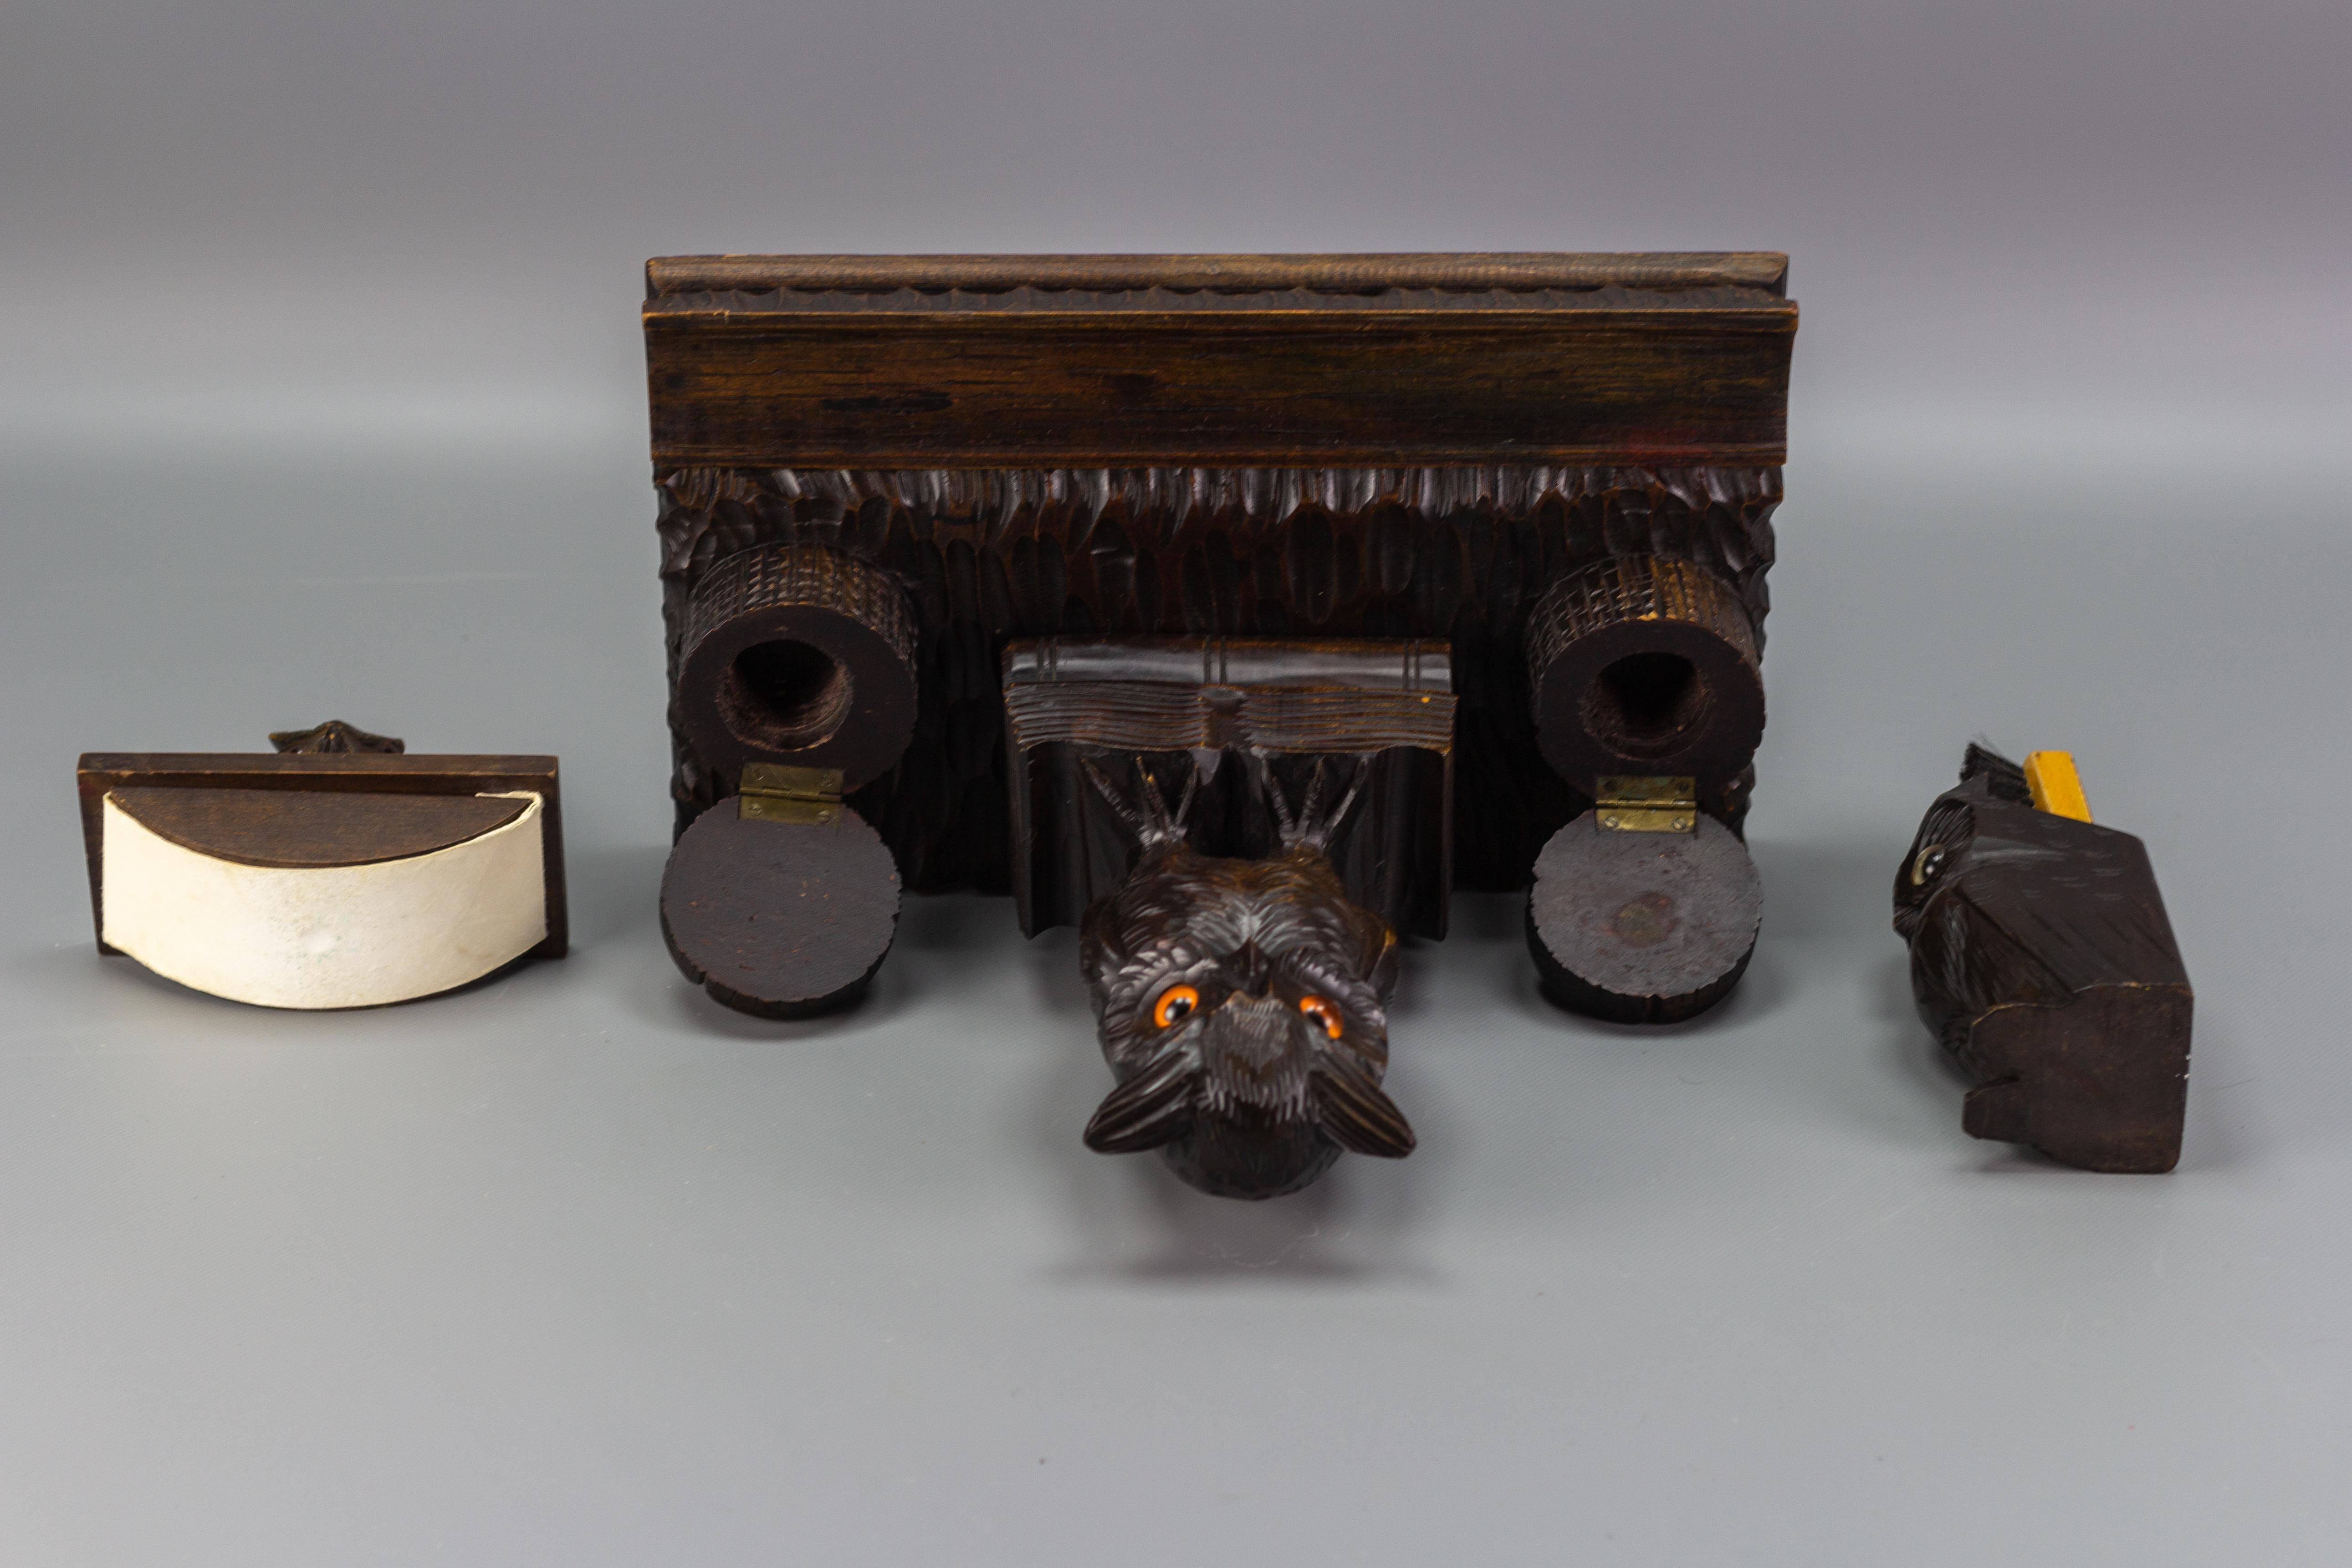 Hand-Carved Wooden Inkwell Desk Set with Owl Figures, 1930s For Sale 7